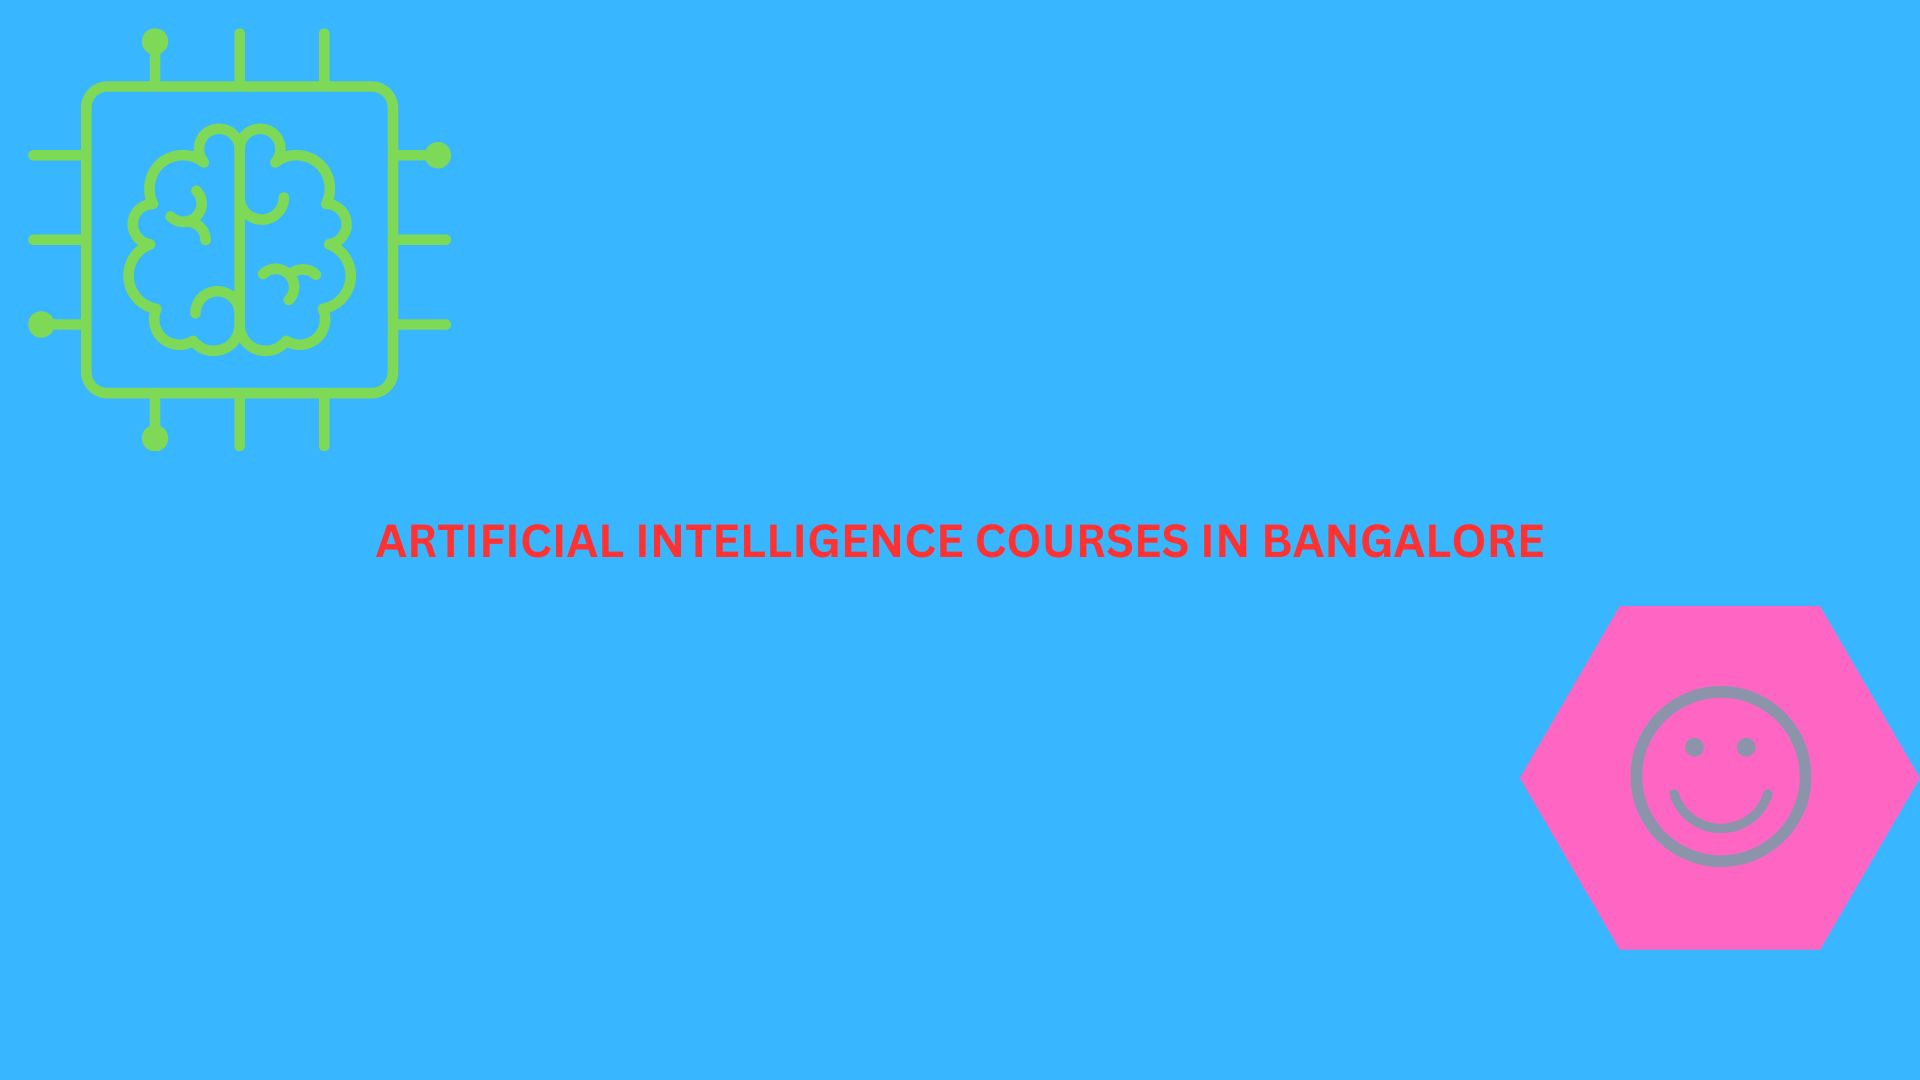 Artificial Intelligence Courses in Bangalore